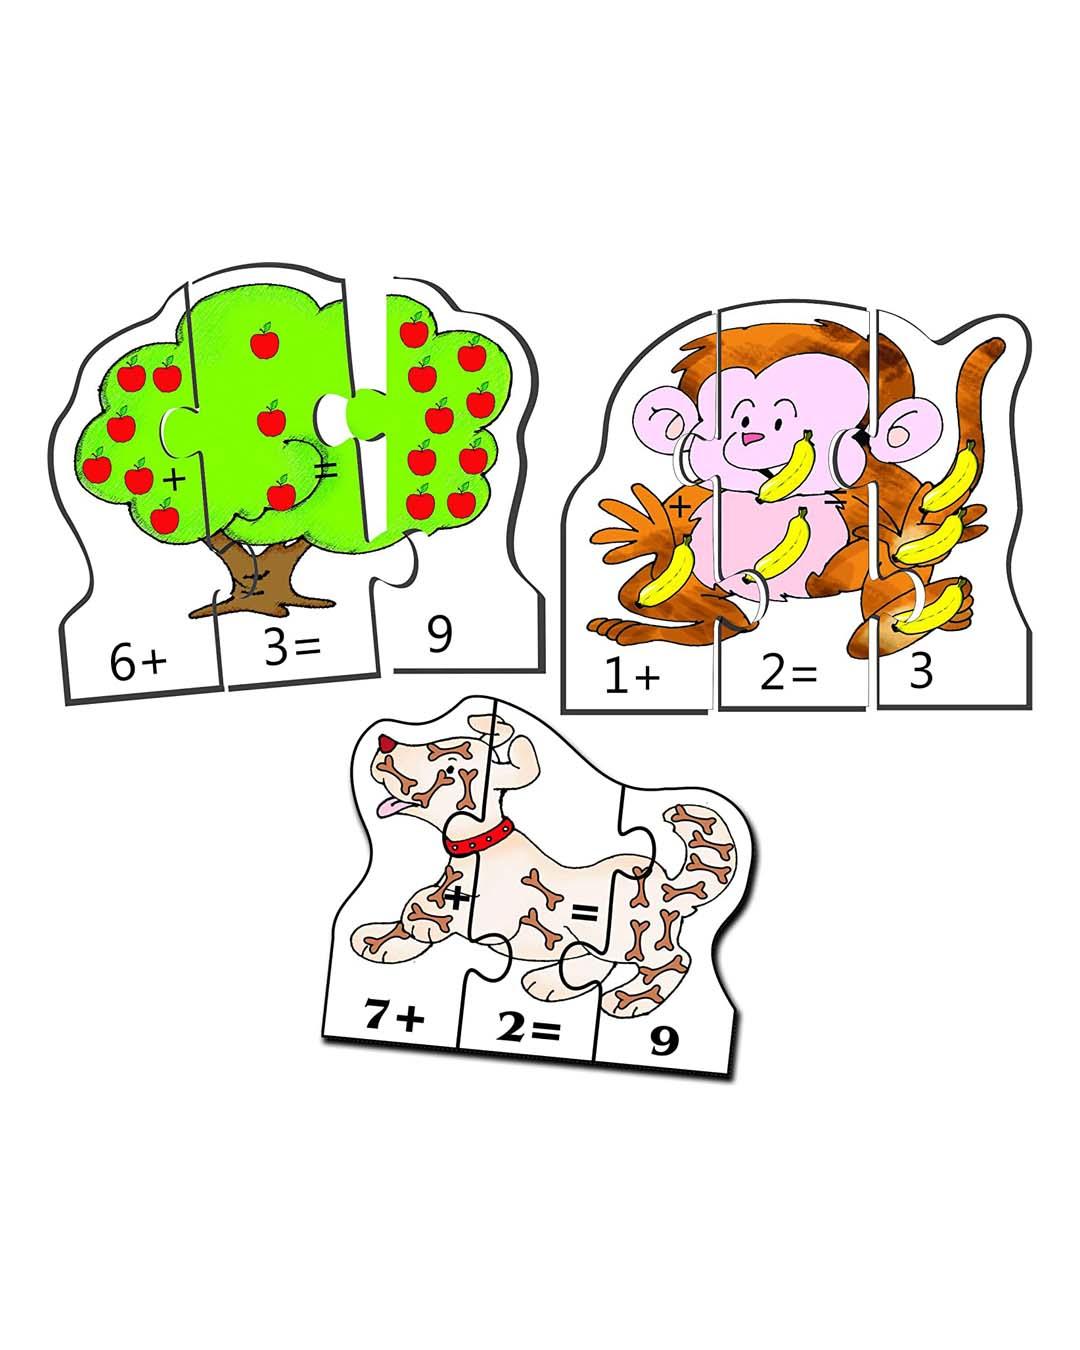 Creative Fun With Sums-Addition & Subtraction, (Early Learning) for Kid - For Child Age 4 & Up - MARKET 99